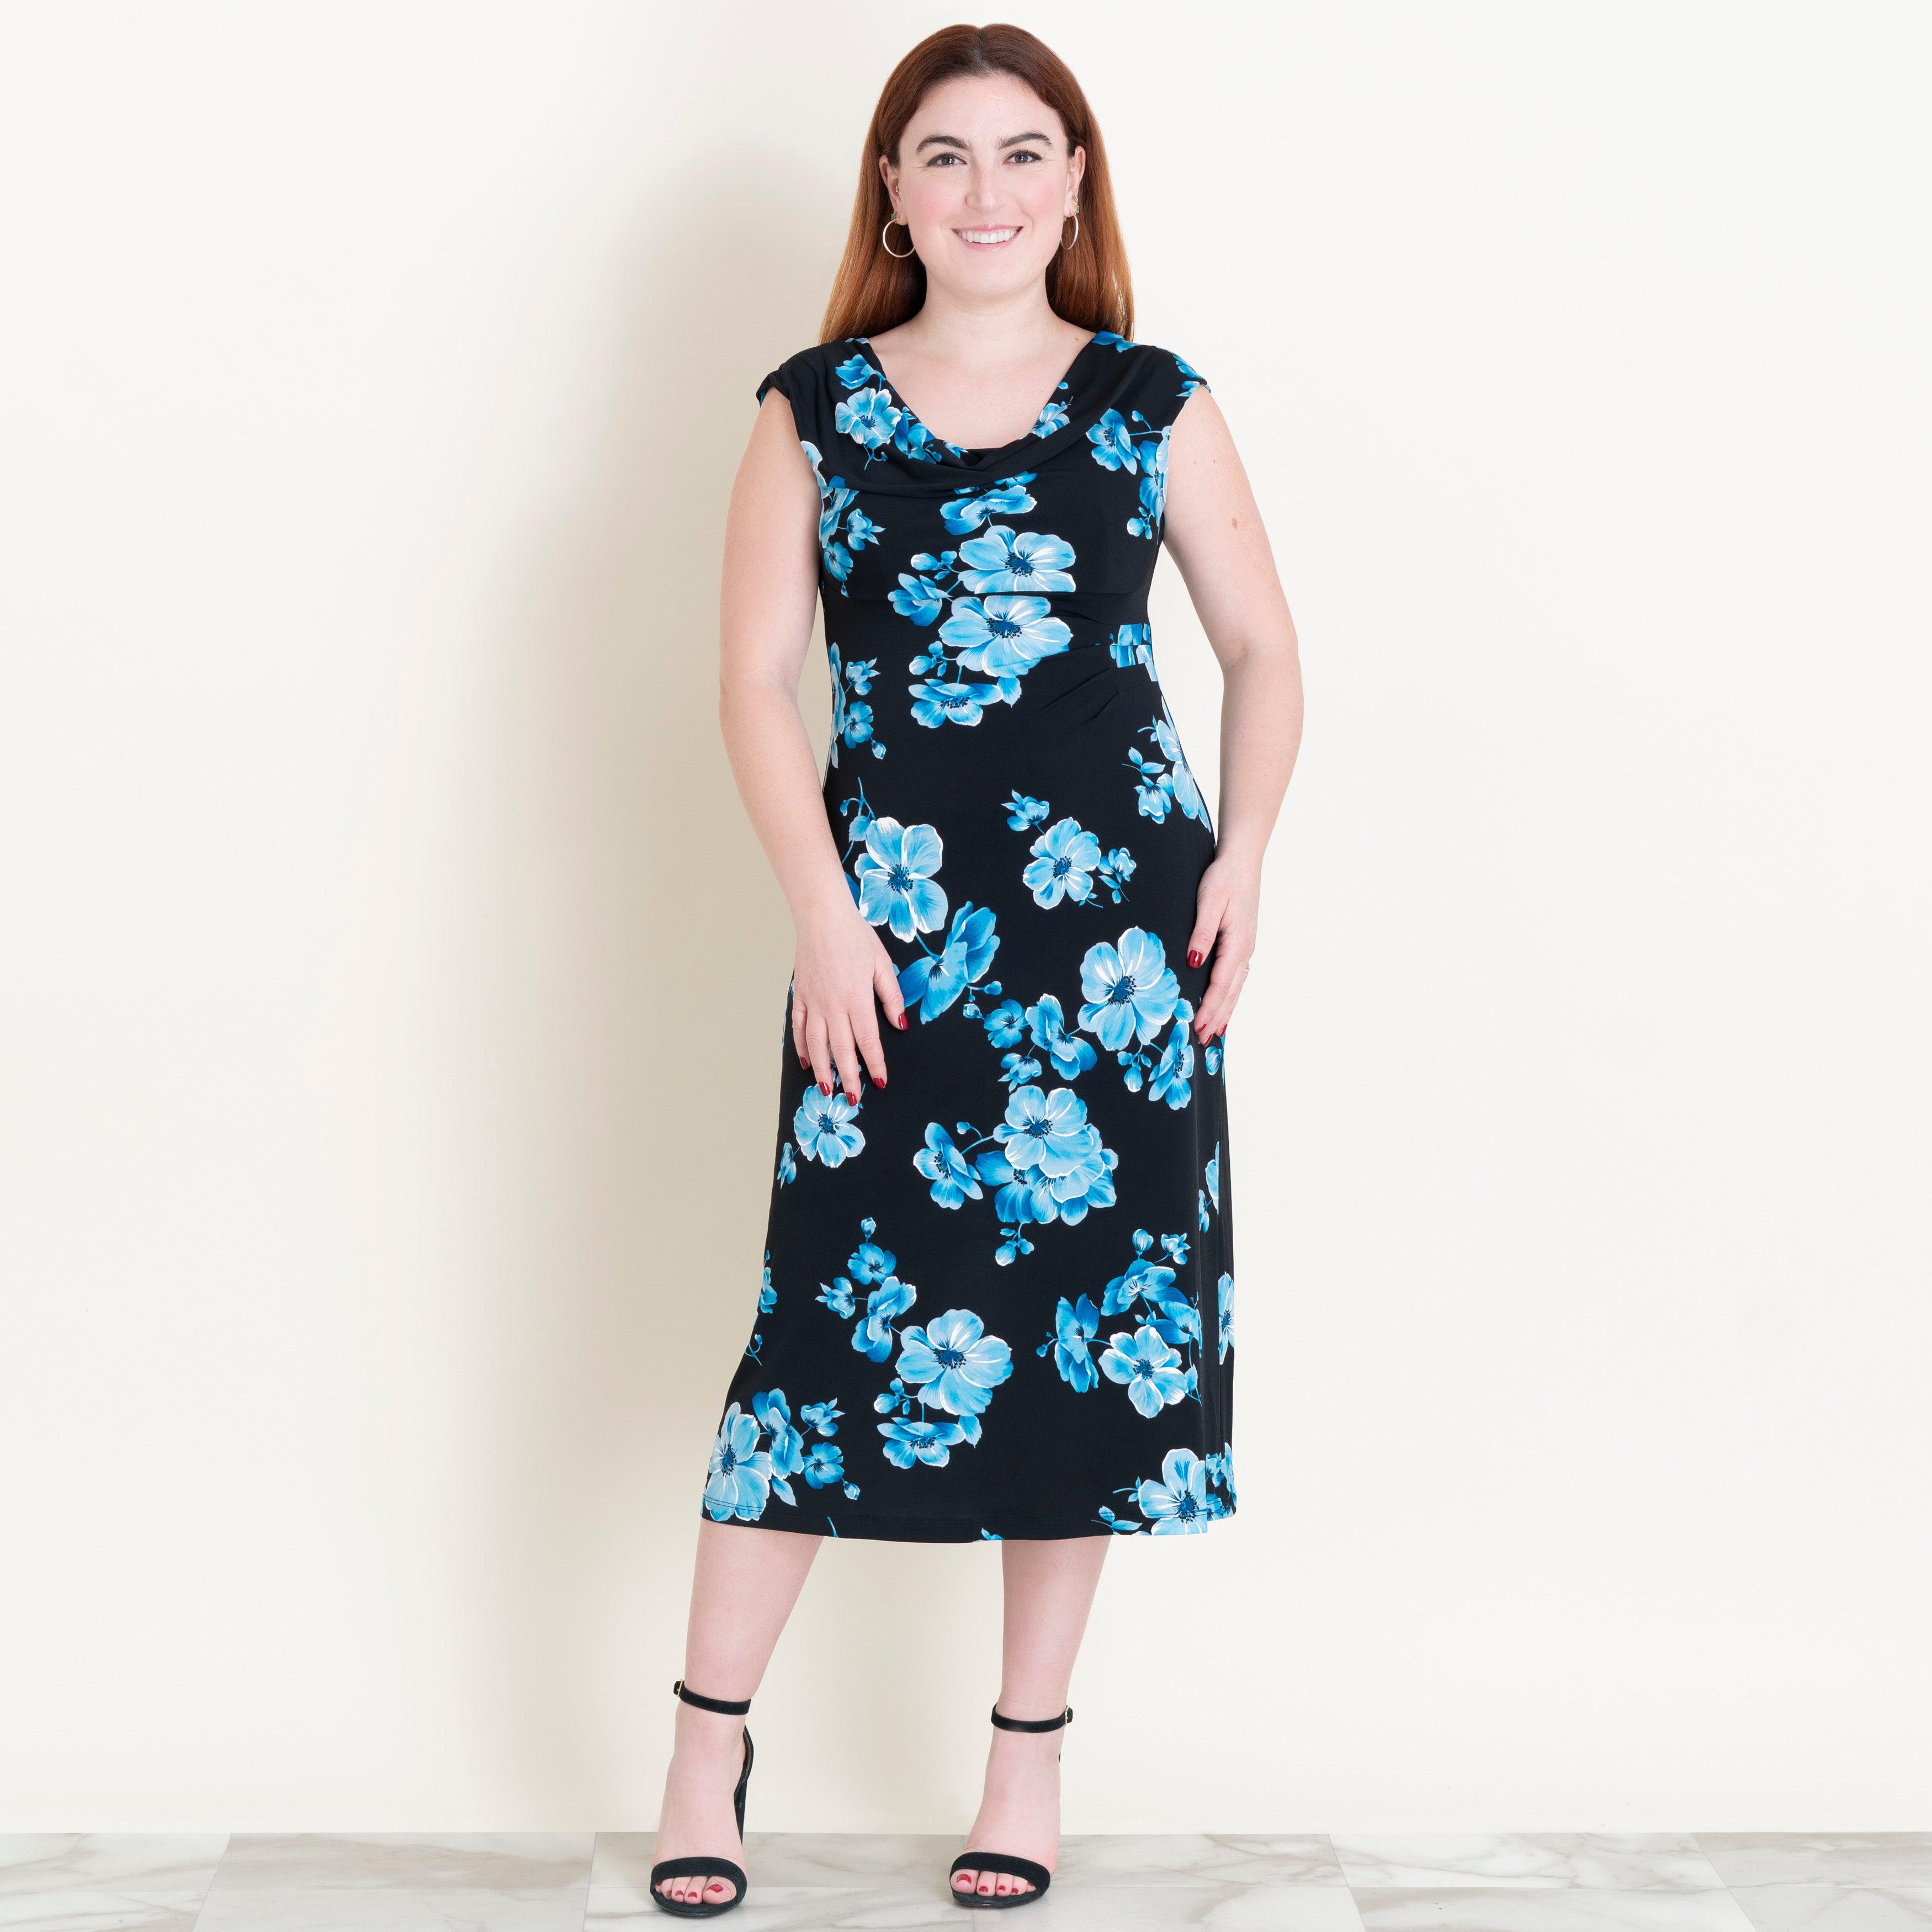 Woman posing wearing Turquoise Tonya Turquoise Floral Midi Dress from Connected Apparel